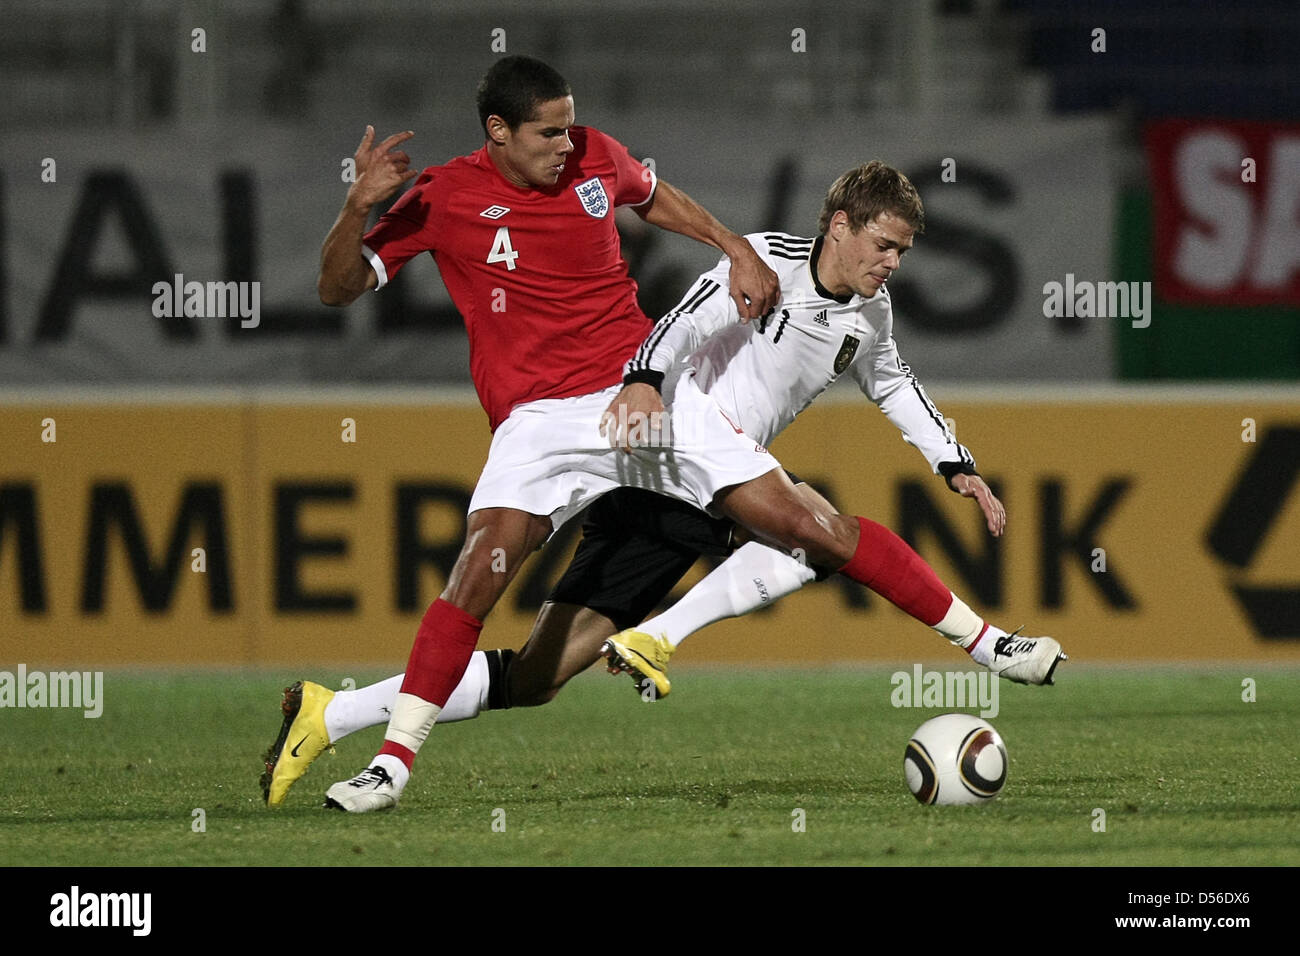 Germany's Boris Vukcevic (R) and England's Jack Rodwell vie for the ball during the U-21 international match Germany vs. England at the Brita-Arena in Wiesbaden, Germany, 16 November 2010. Photo: Fredrik von Erichsen Stock Photo